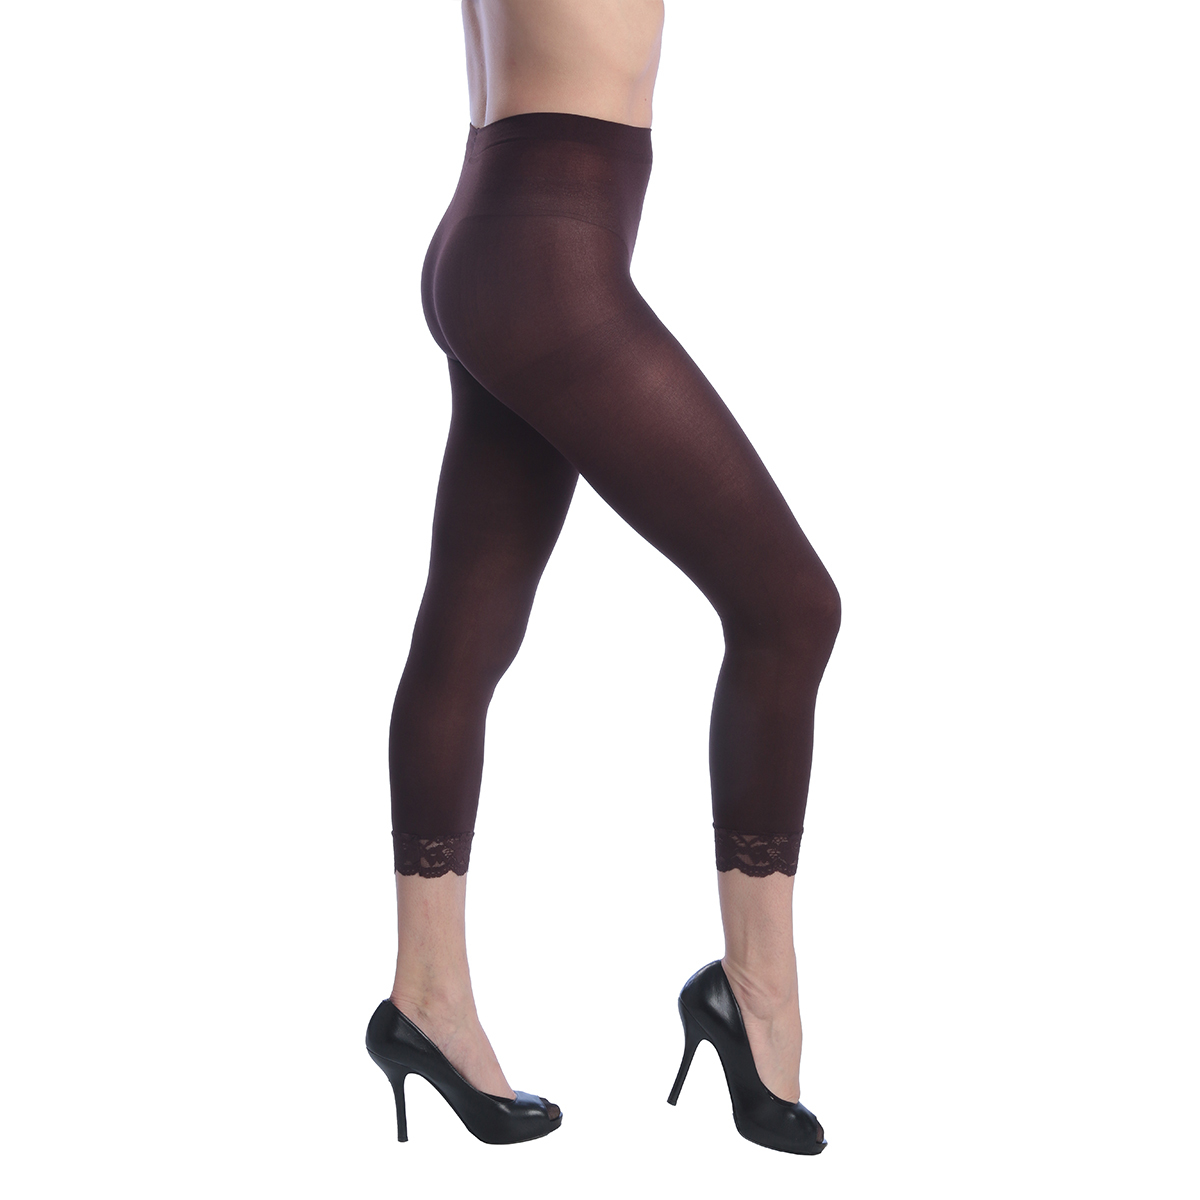 Women's Opaque Control Top Footless Lace Tights - Brown, Queen Size